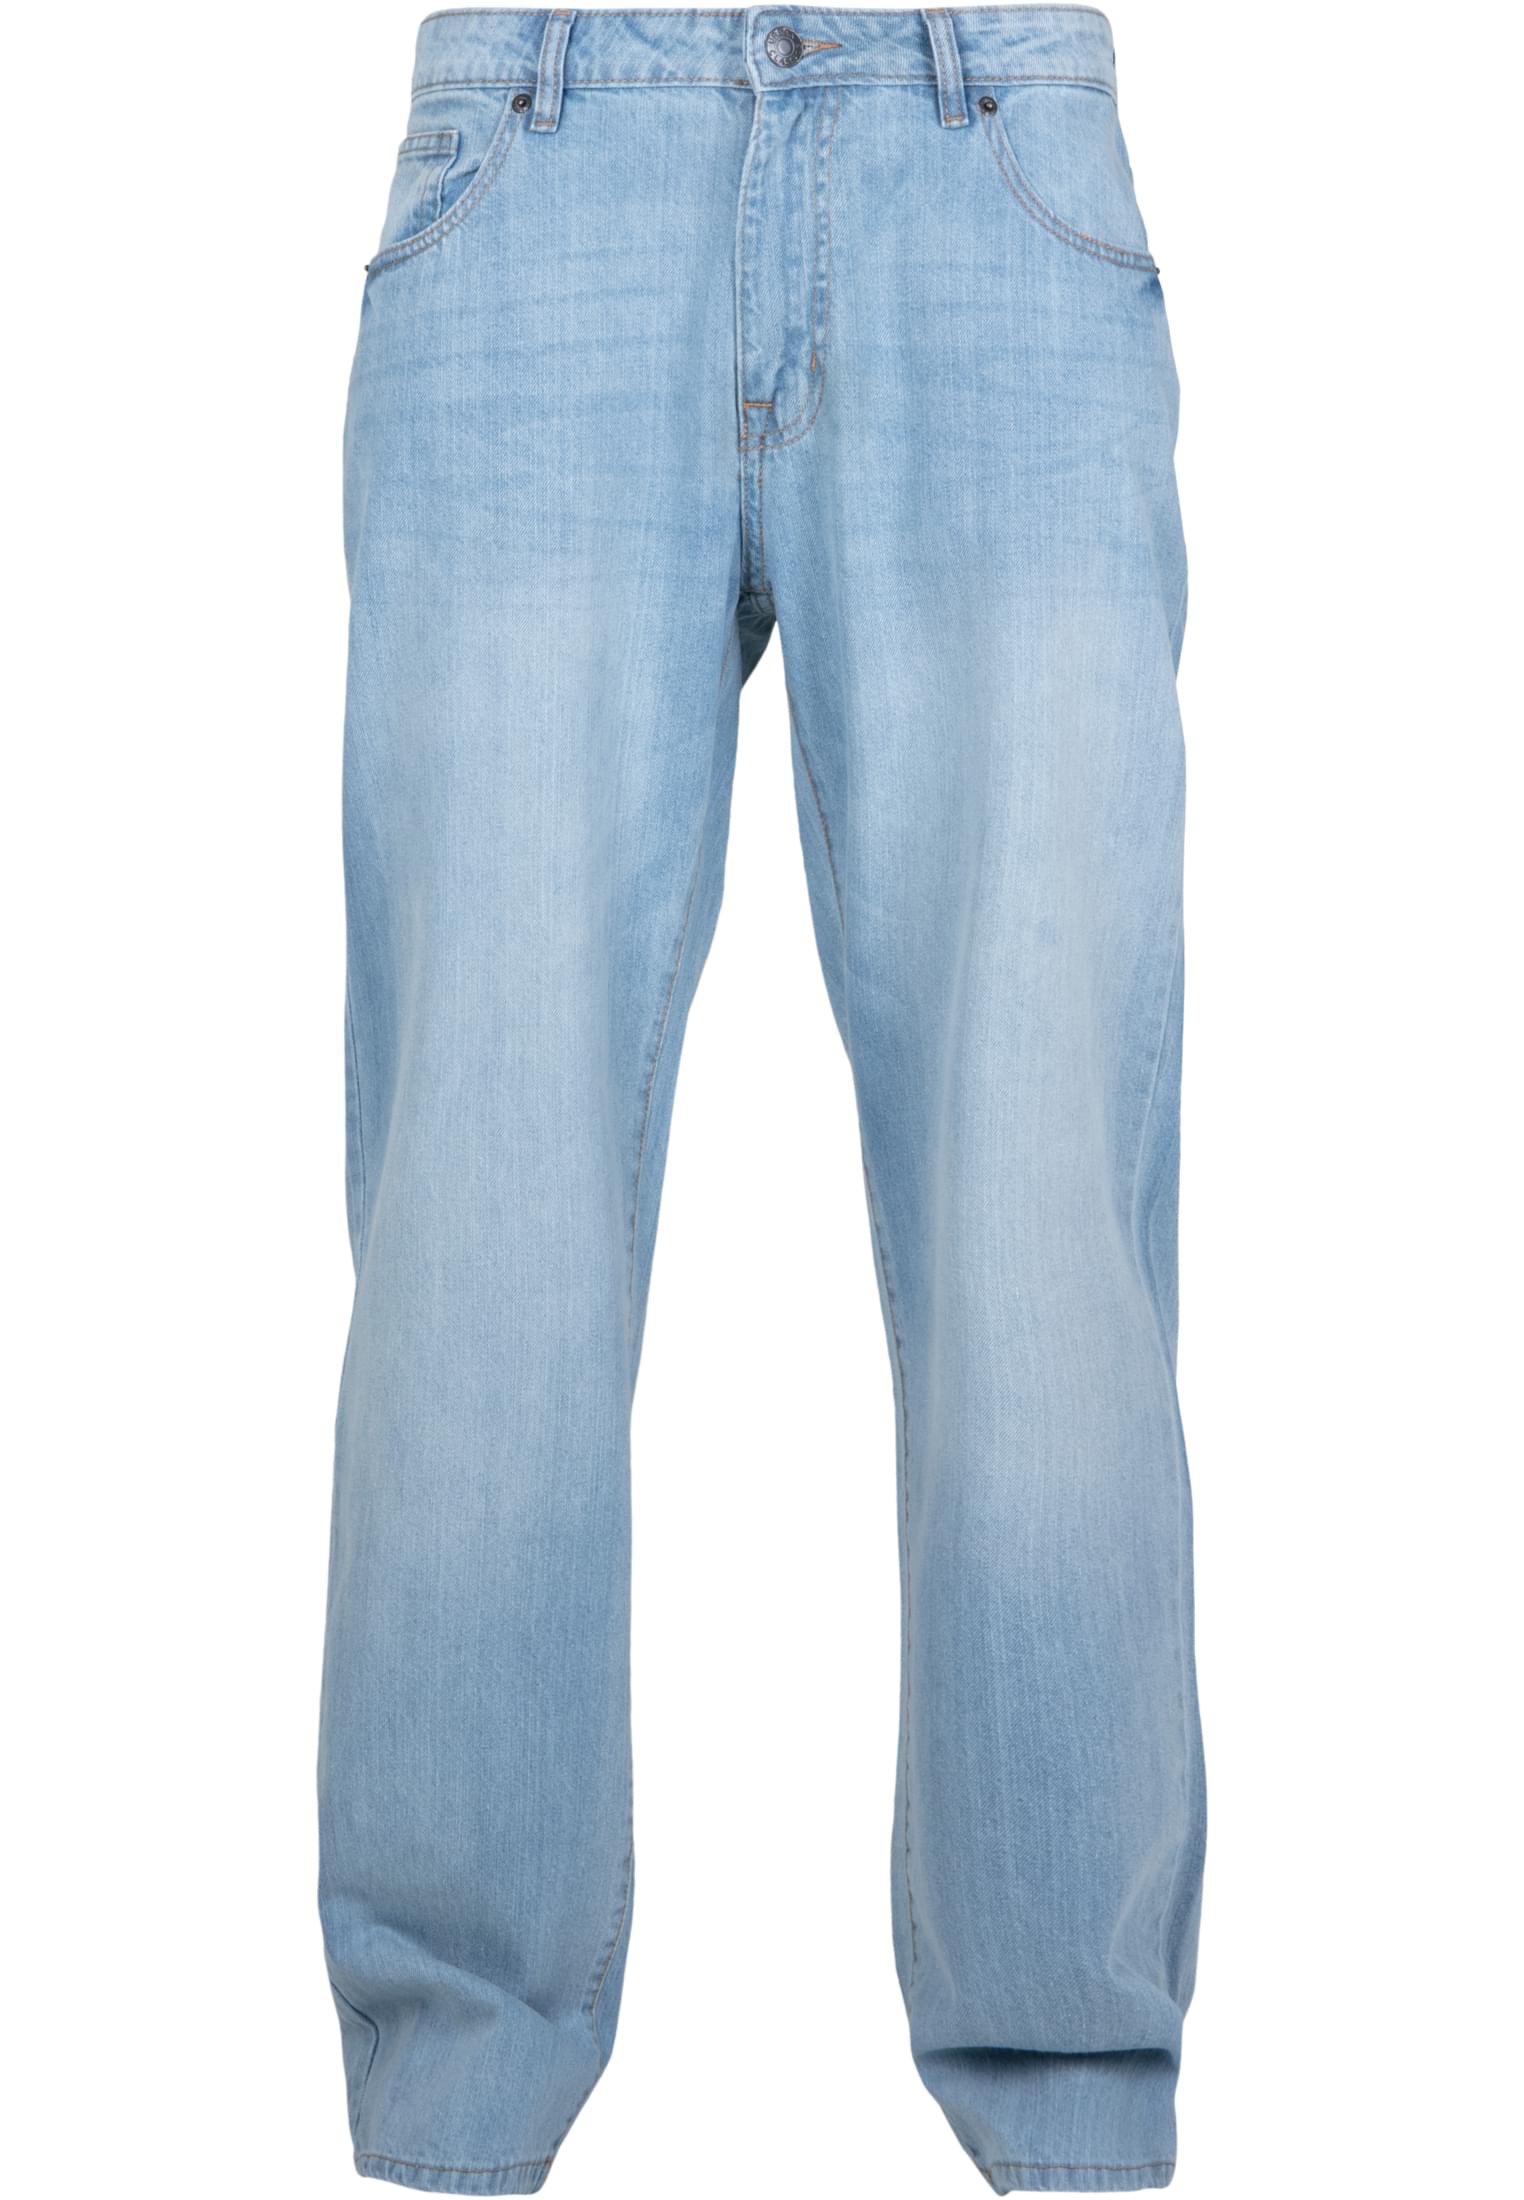 Hosen Loose Fit Jeans in Farbe lighter washed